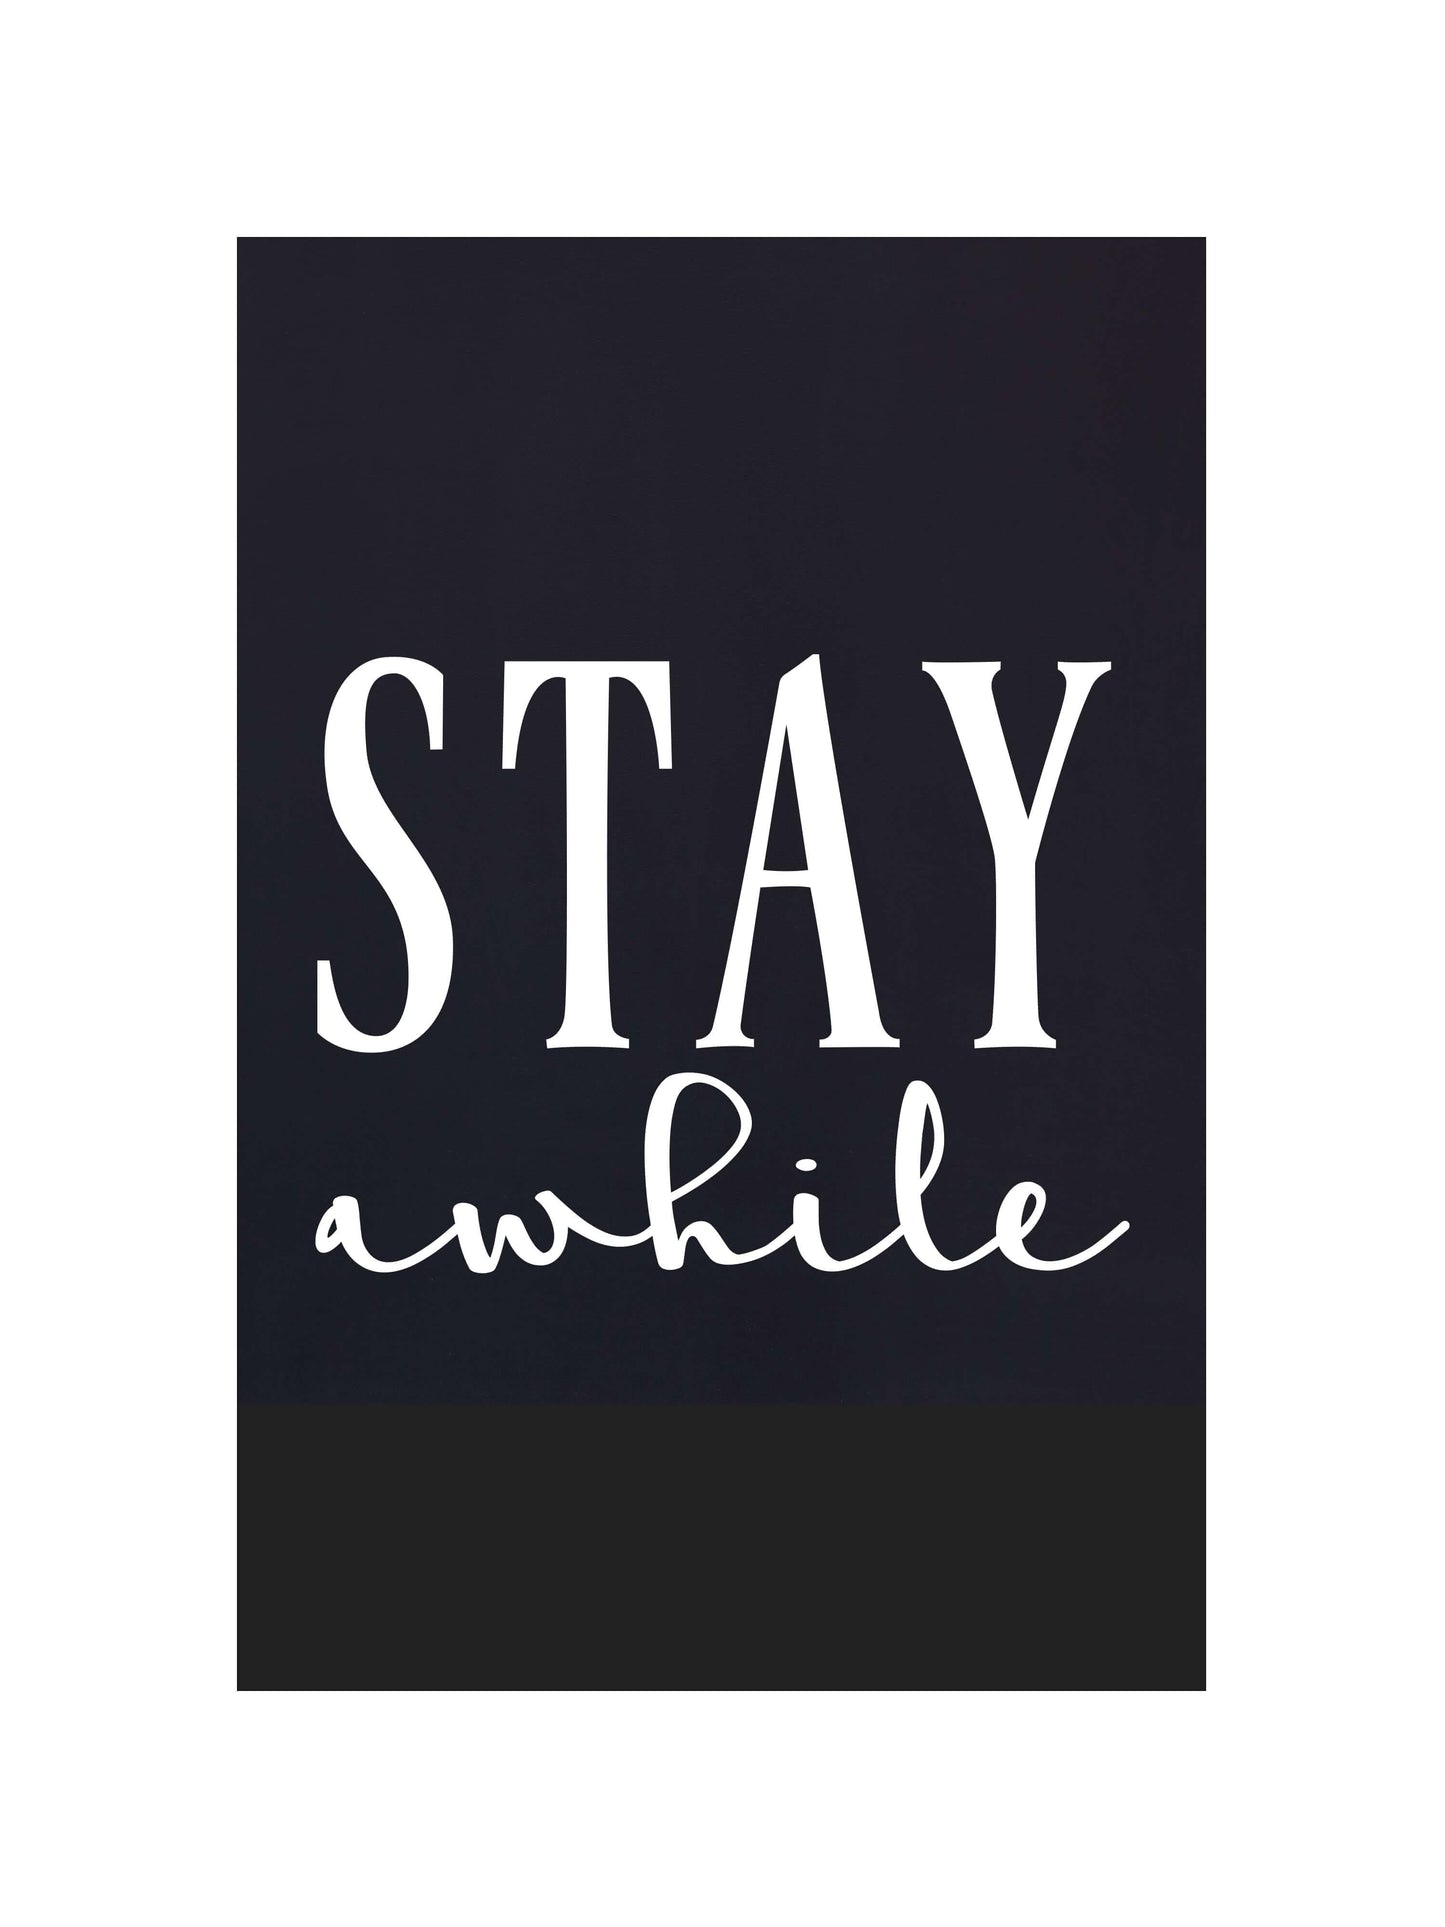 Joyfully Said Wooden signs 8 inches x 12 inches / Black-White Text / Dark brown stain Stay Awhile